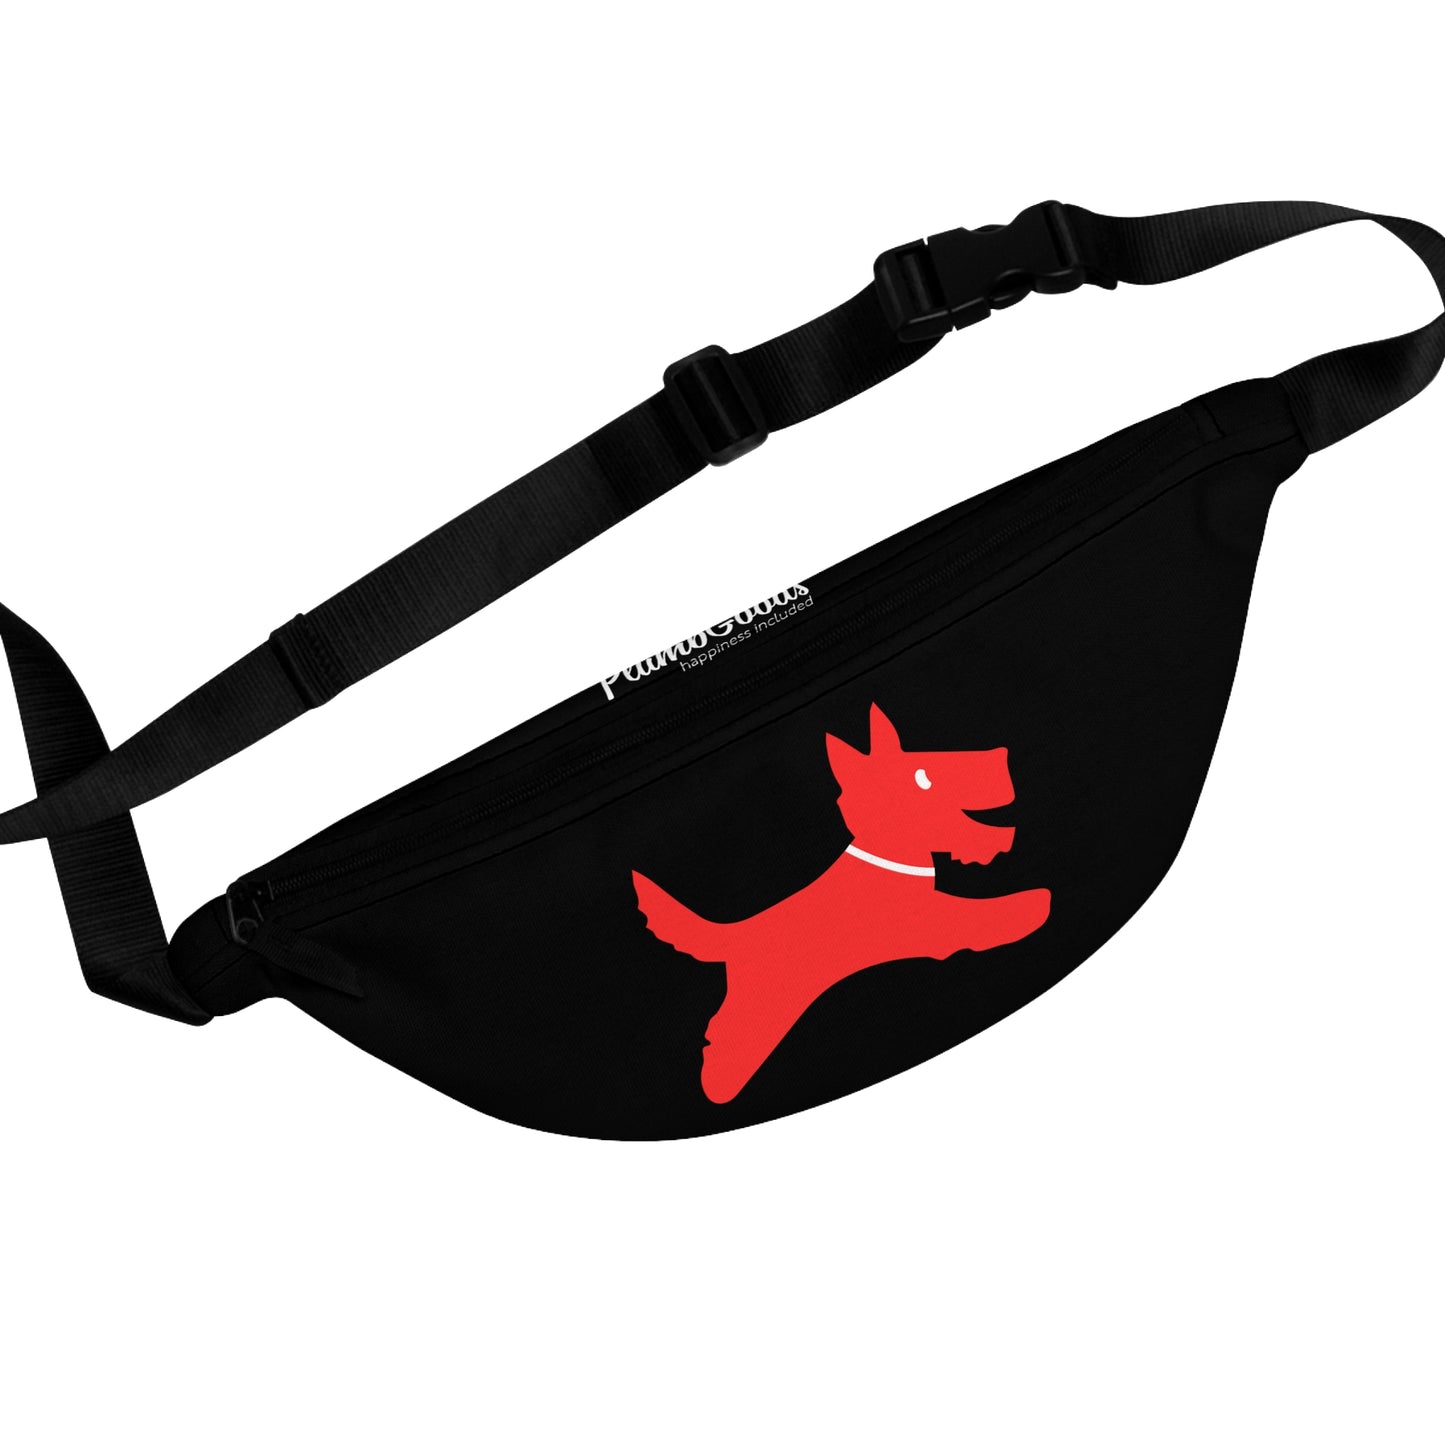 Perky Fanny Pack Black with Red Perky